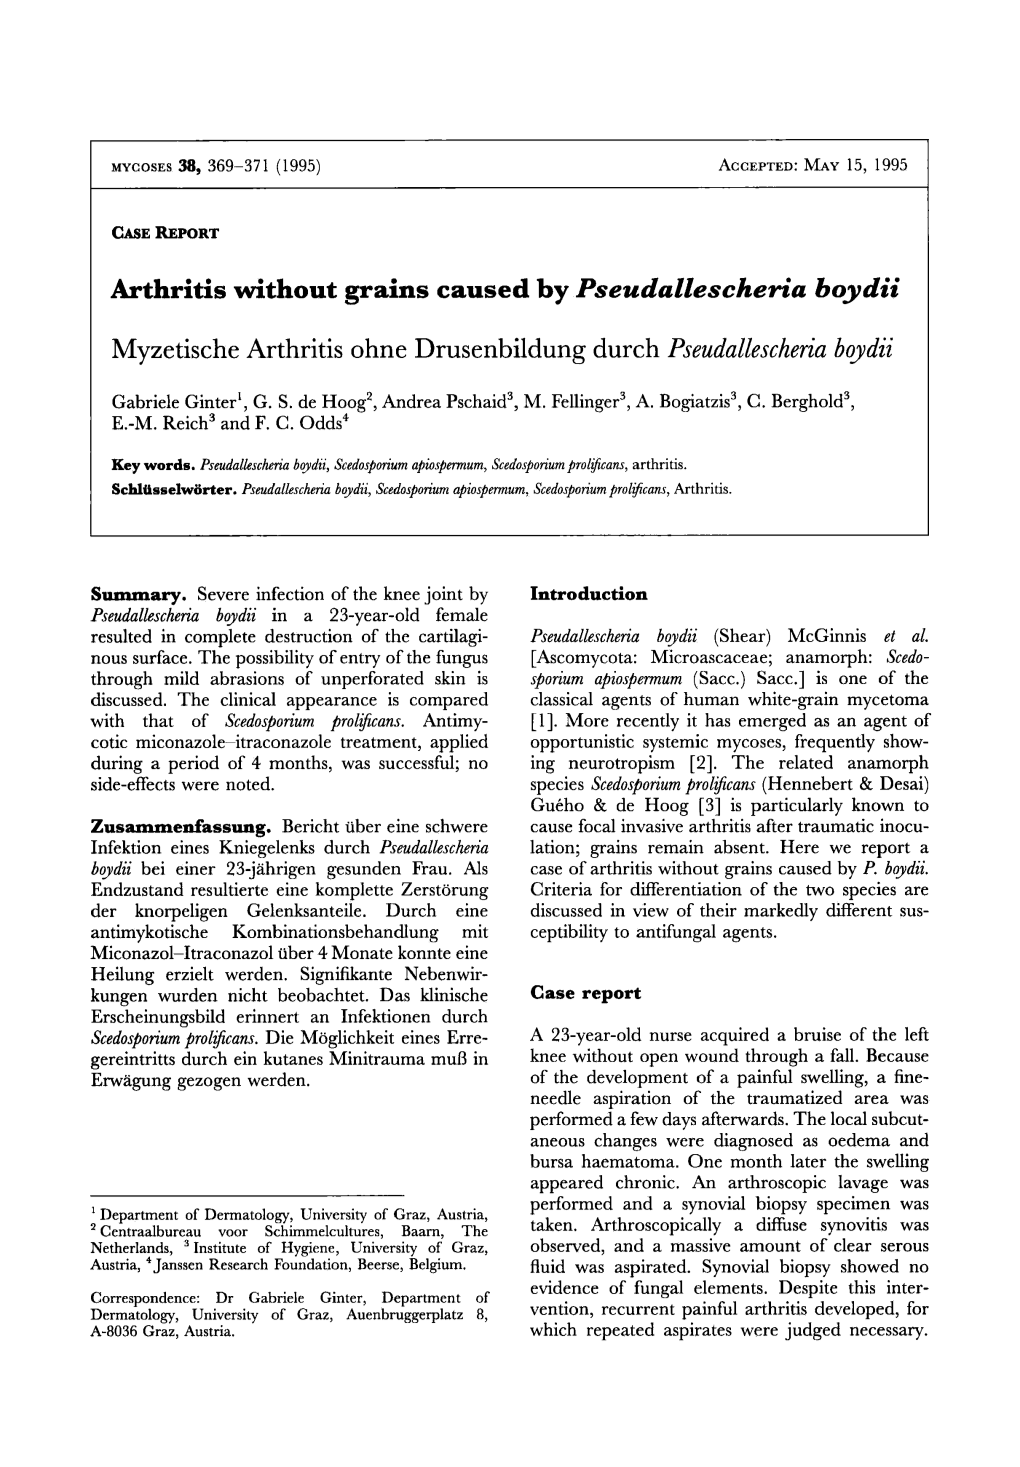 Arthritis Without Grains Caused by Pseudallescheria Boydii